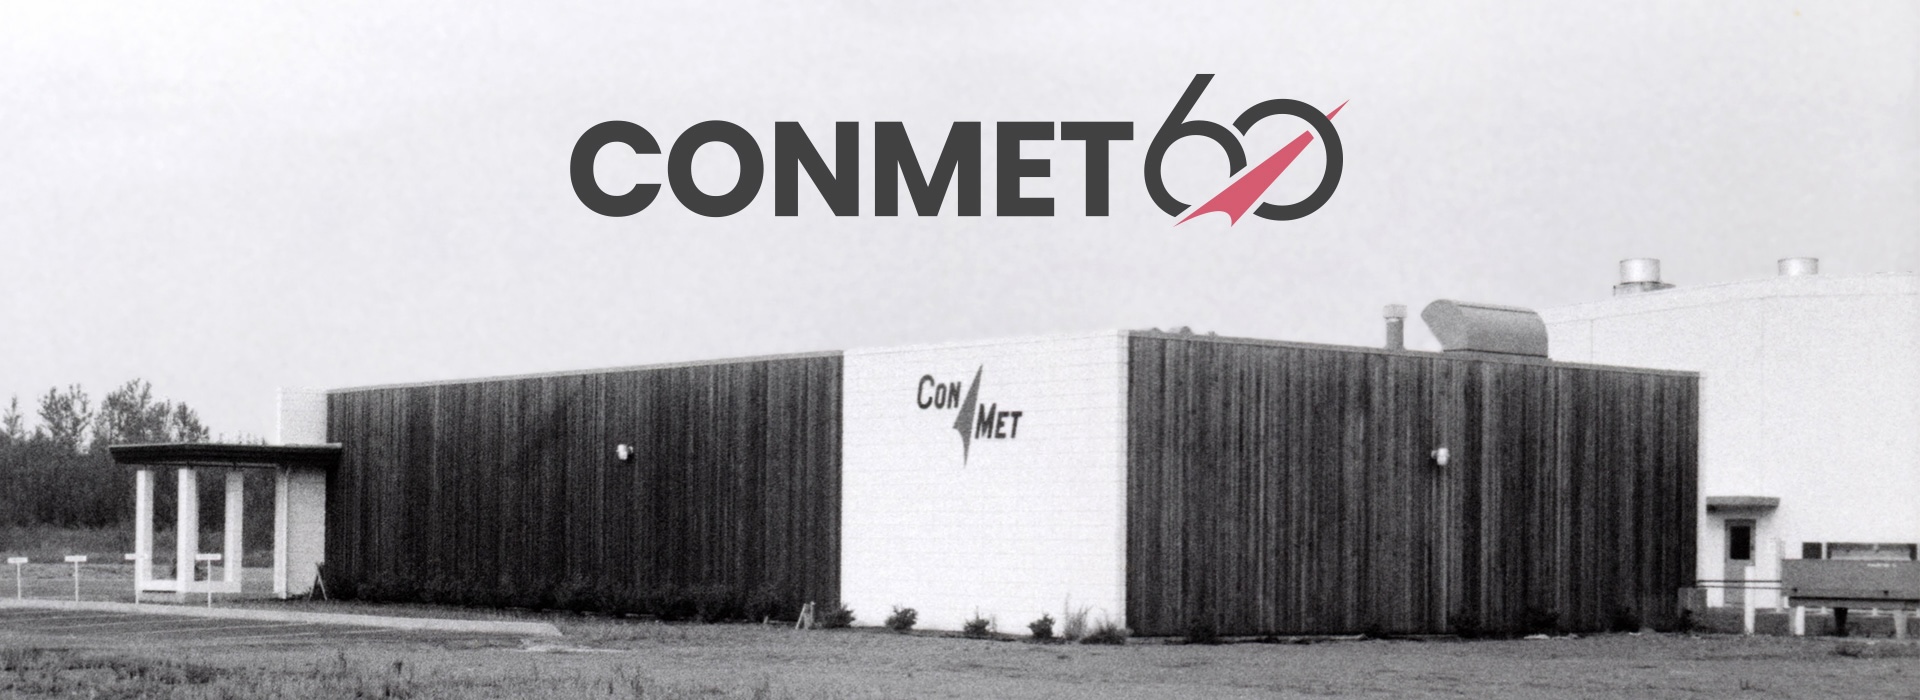 ConMet’s 60-Year Legacy of Commercial Vehicle Innovation